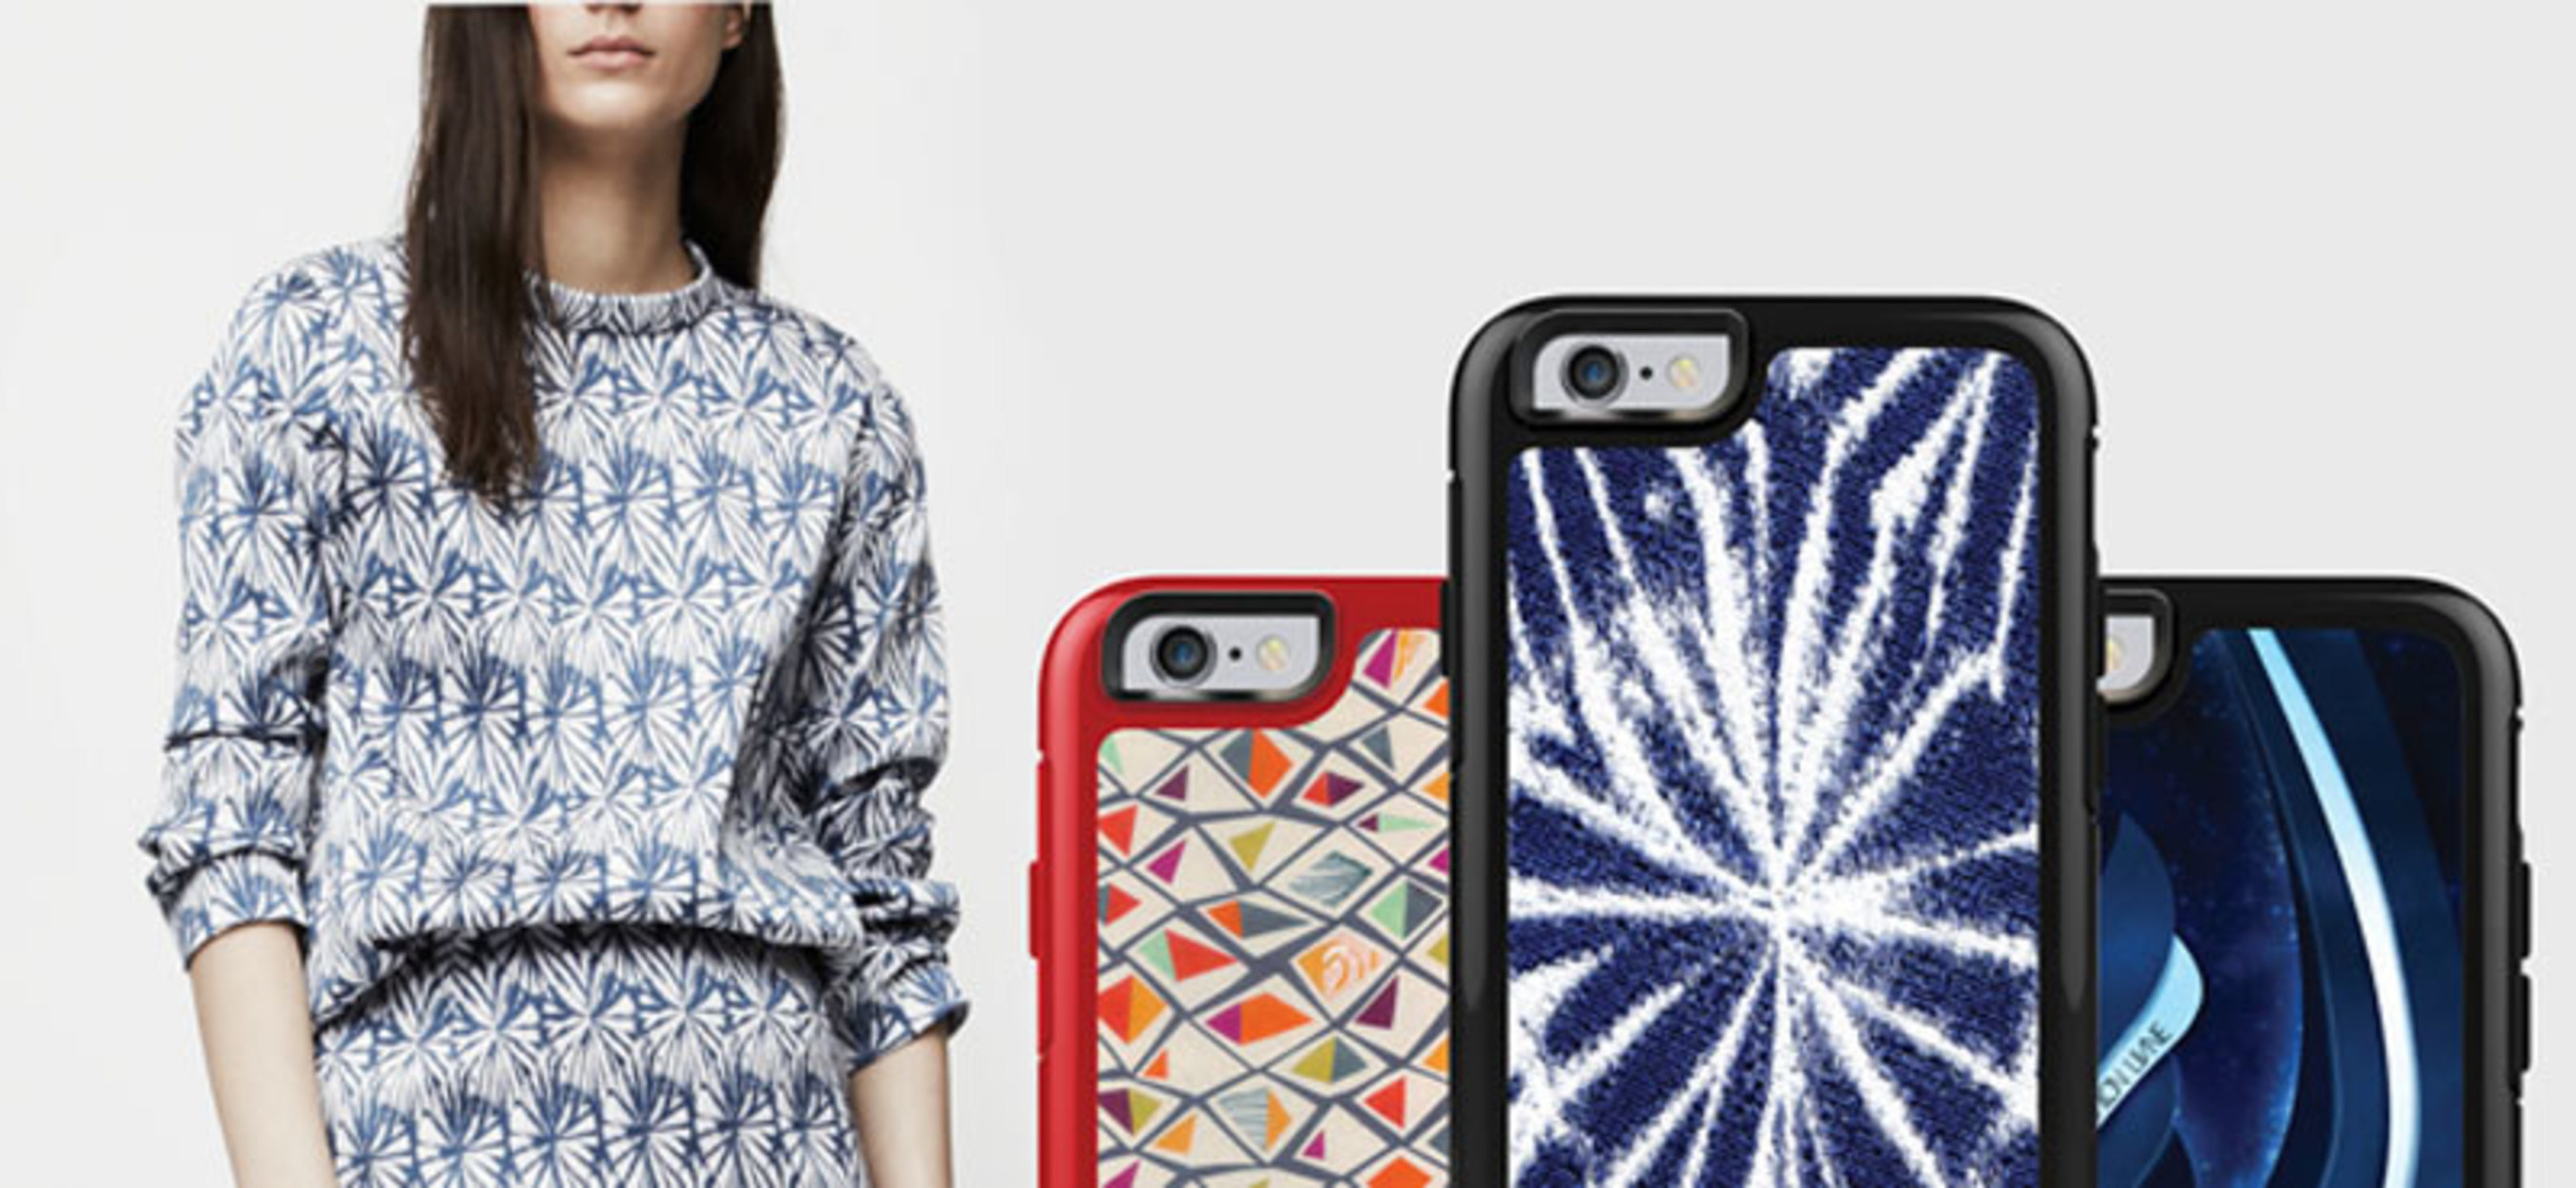 OtterBox MySymmetry Series cases are available now with designs from Wes Gordon, Alon Livne, Fiona Howard and more.